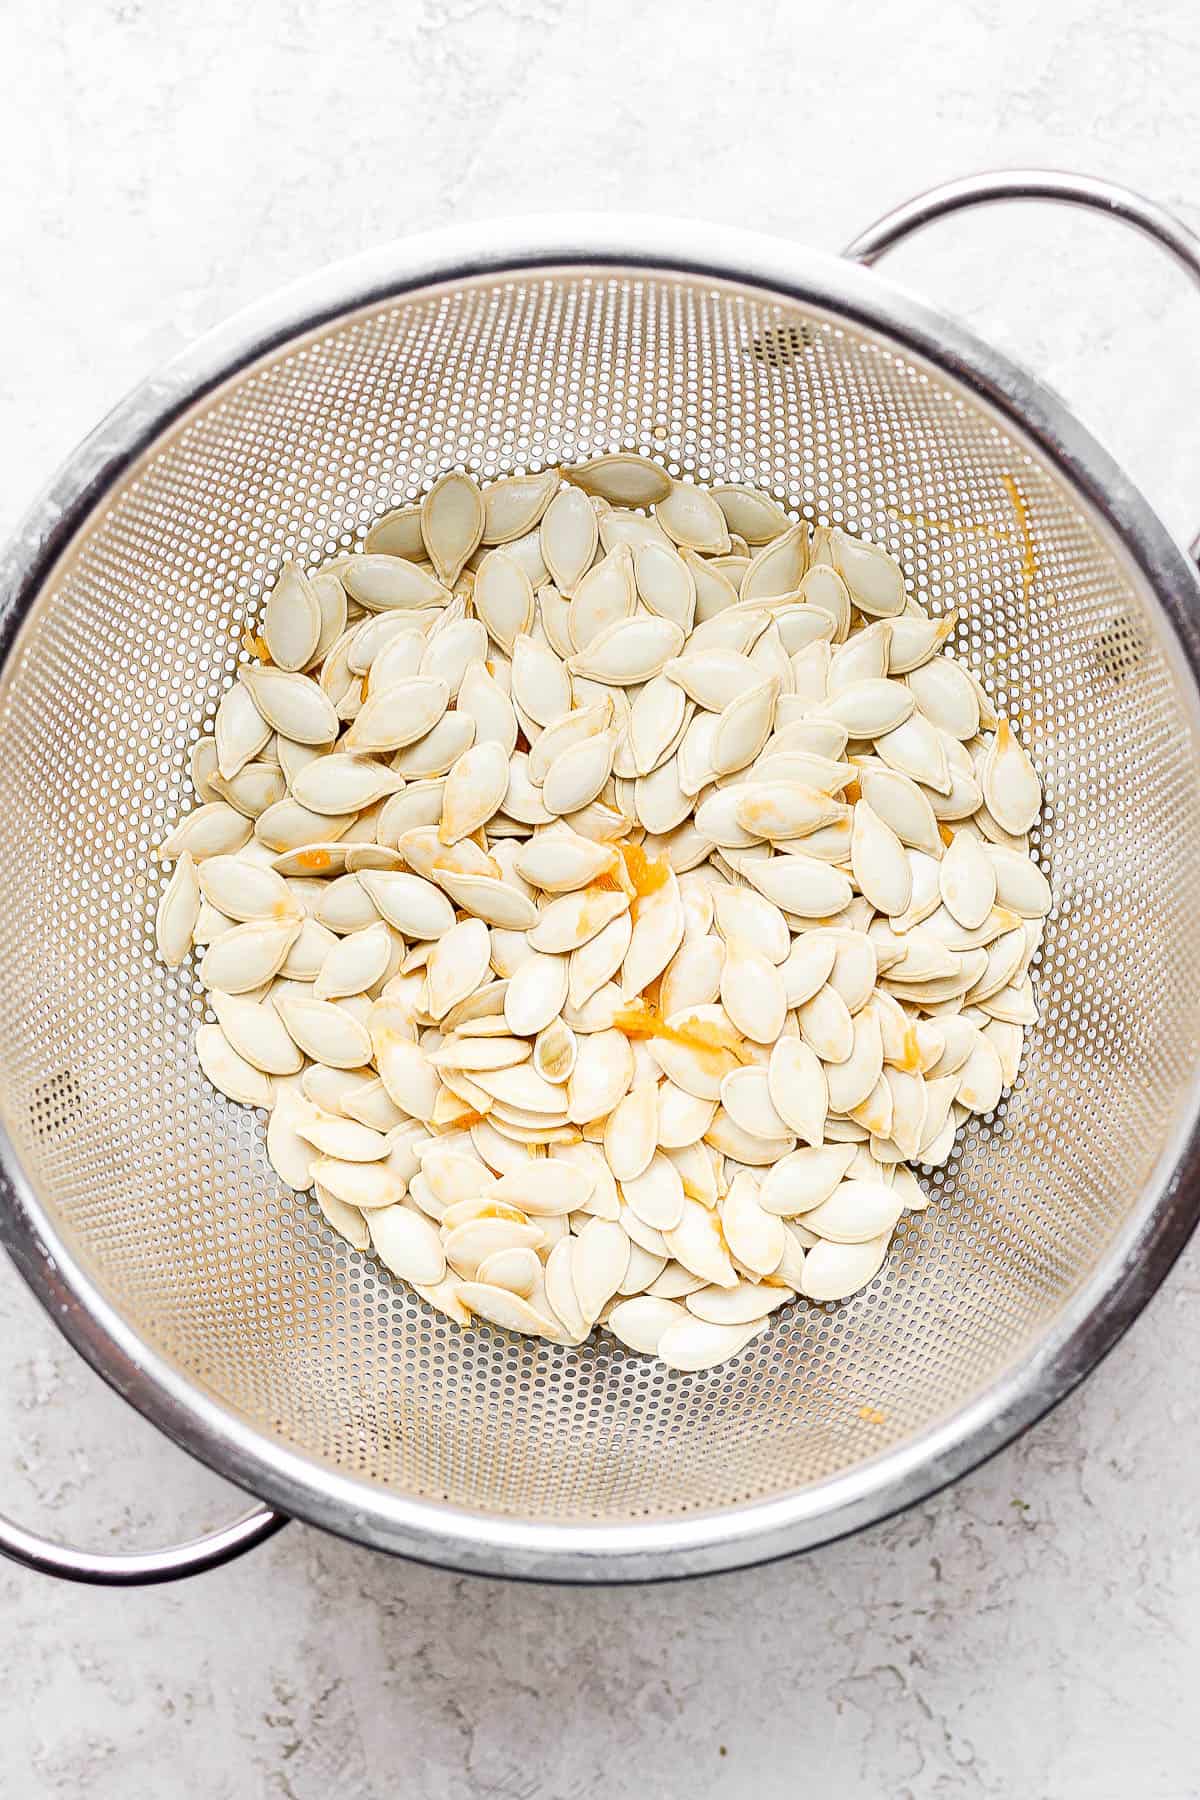 Colander with the pumpkin seeds after removed from pumpkin.